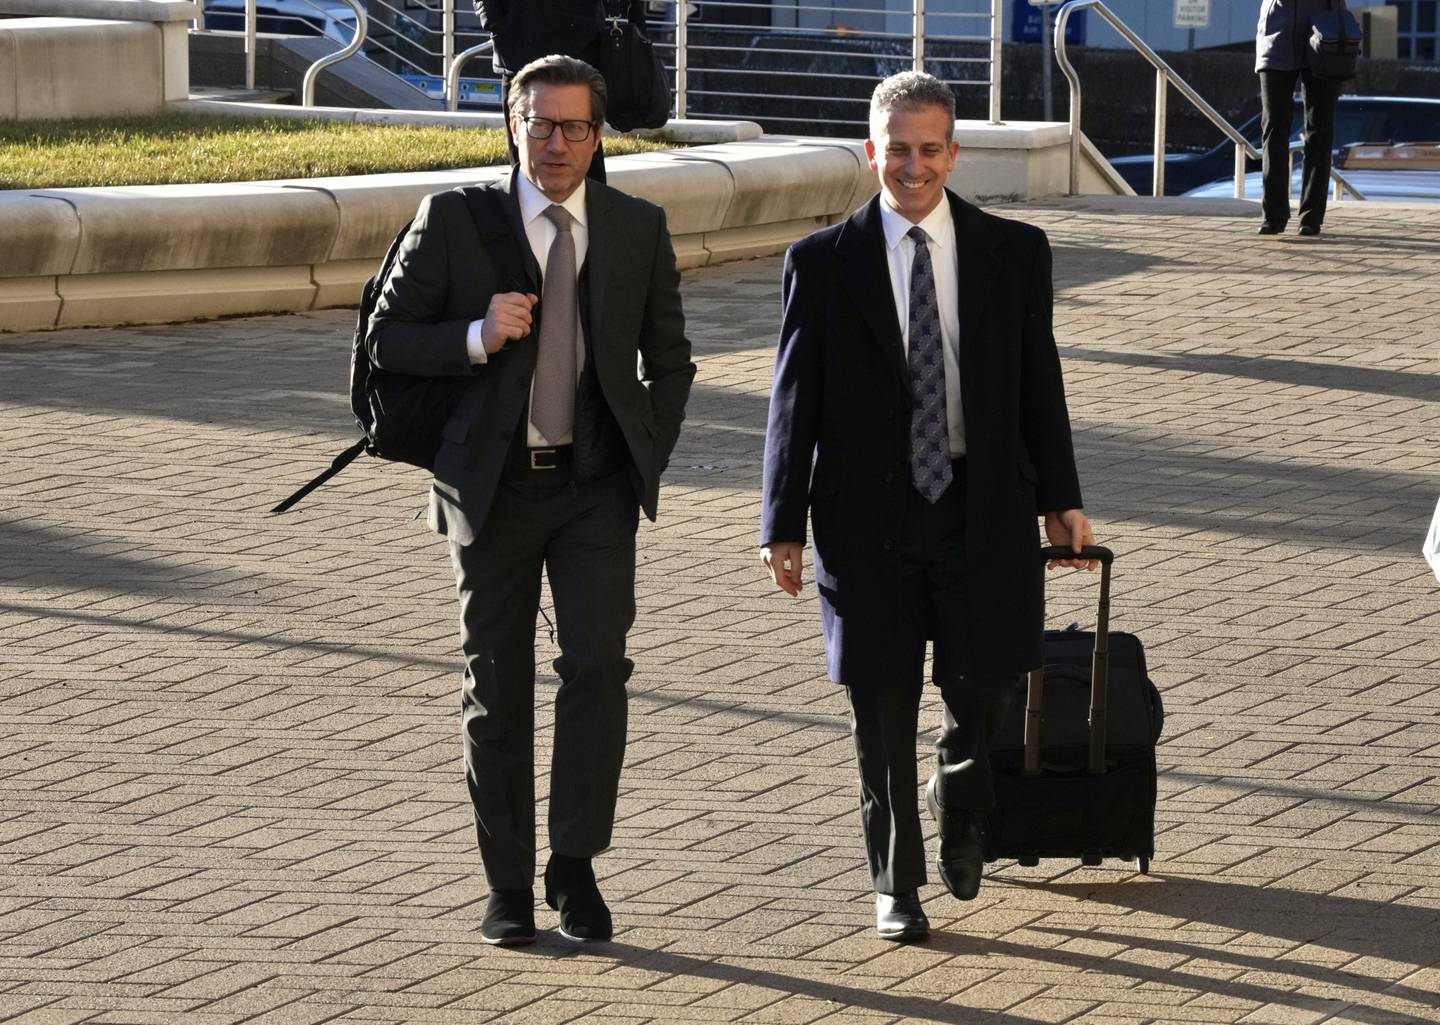 Louis Angelos, left, enters the Baltimore County Courts Building with his attorney, Jeffrey Nusinov, on January 26, 2023.